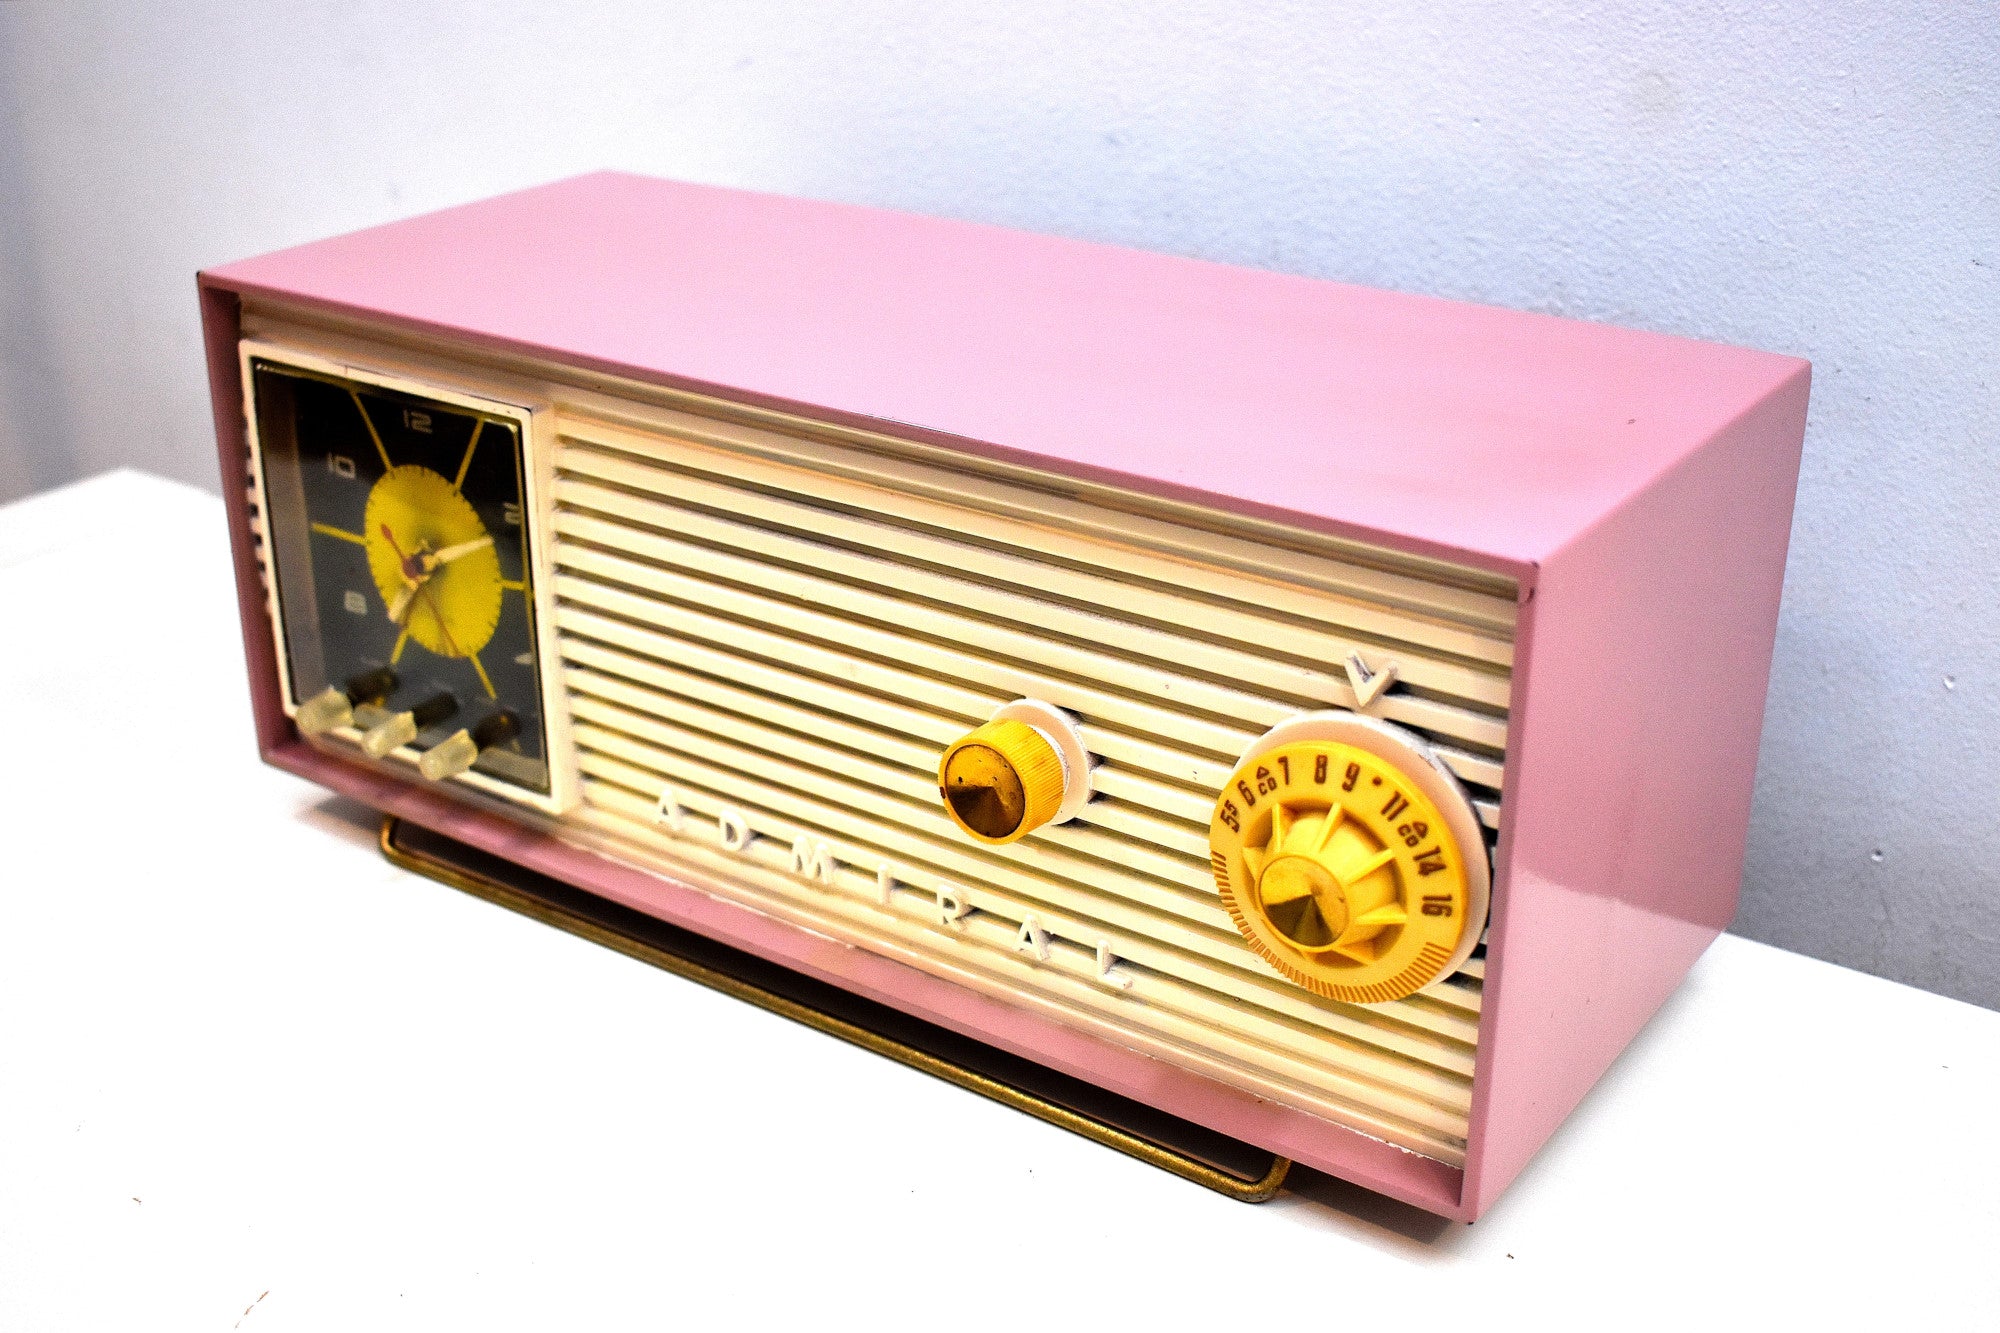 Mauve Pink and Ivory 1955 Admiral Model 5H47N Vintage Atomic Age Vacuum Tube AM Radio Clock Sounds Looks Great!